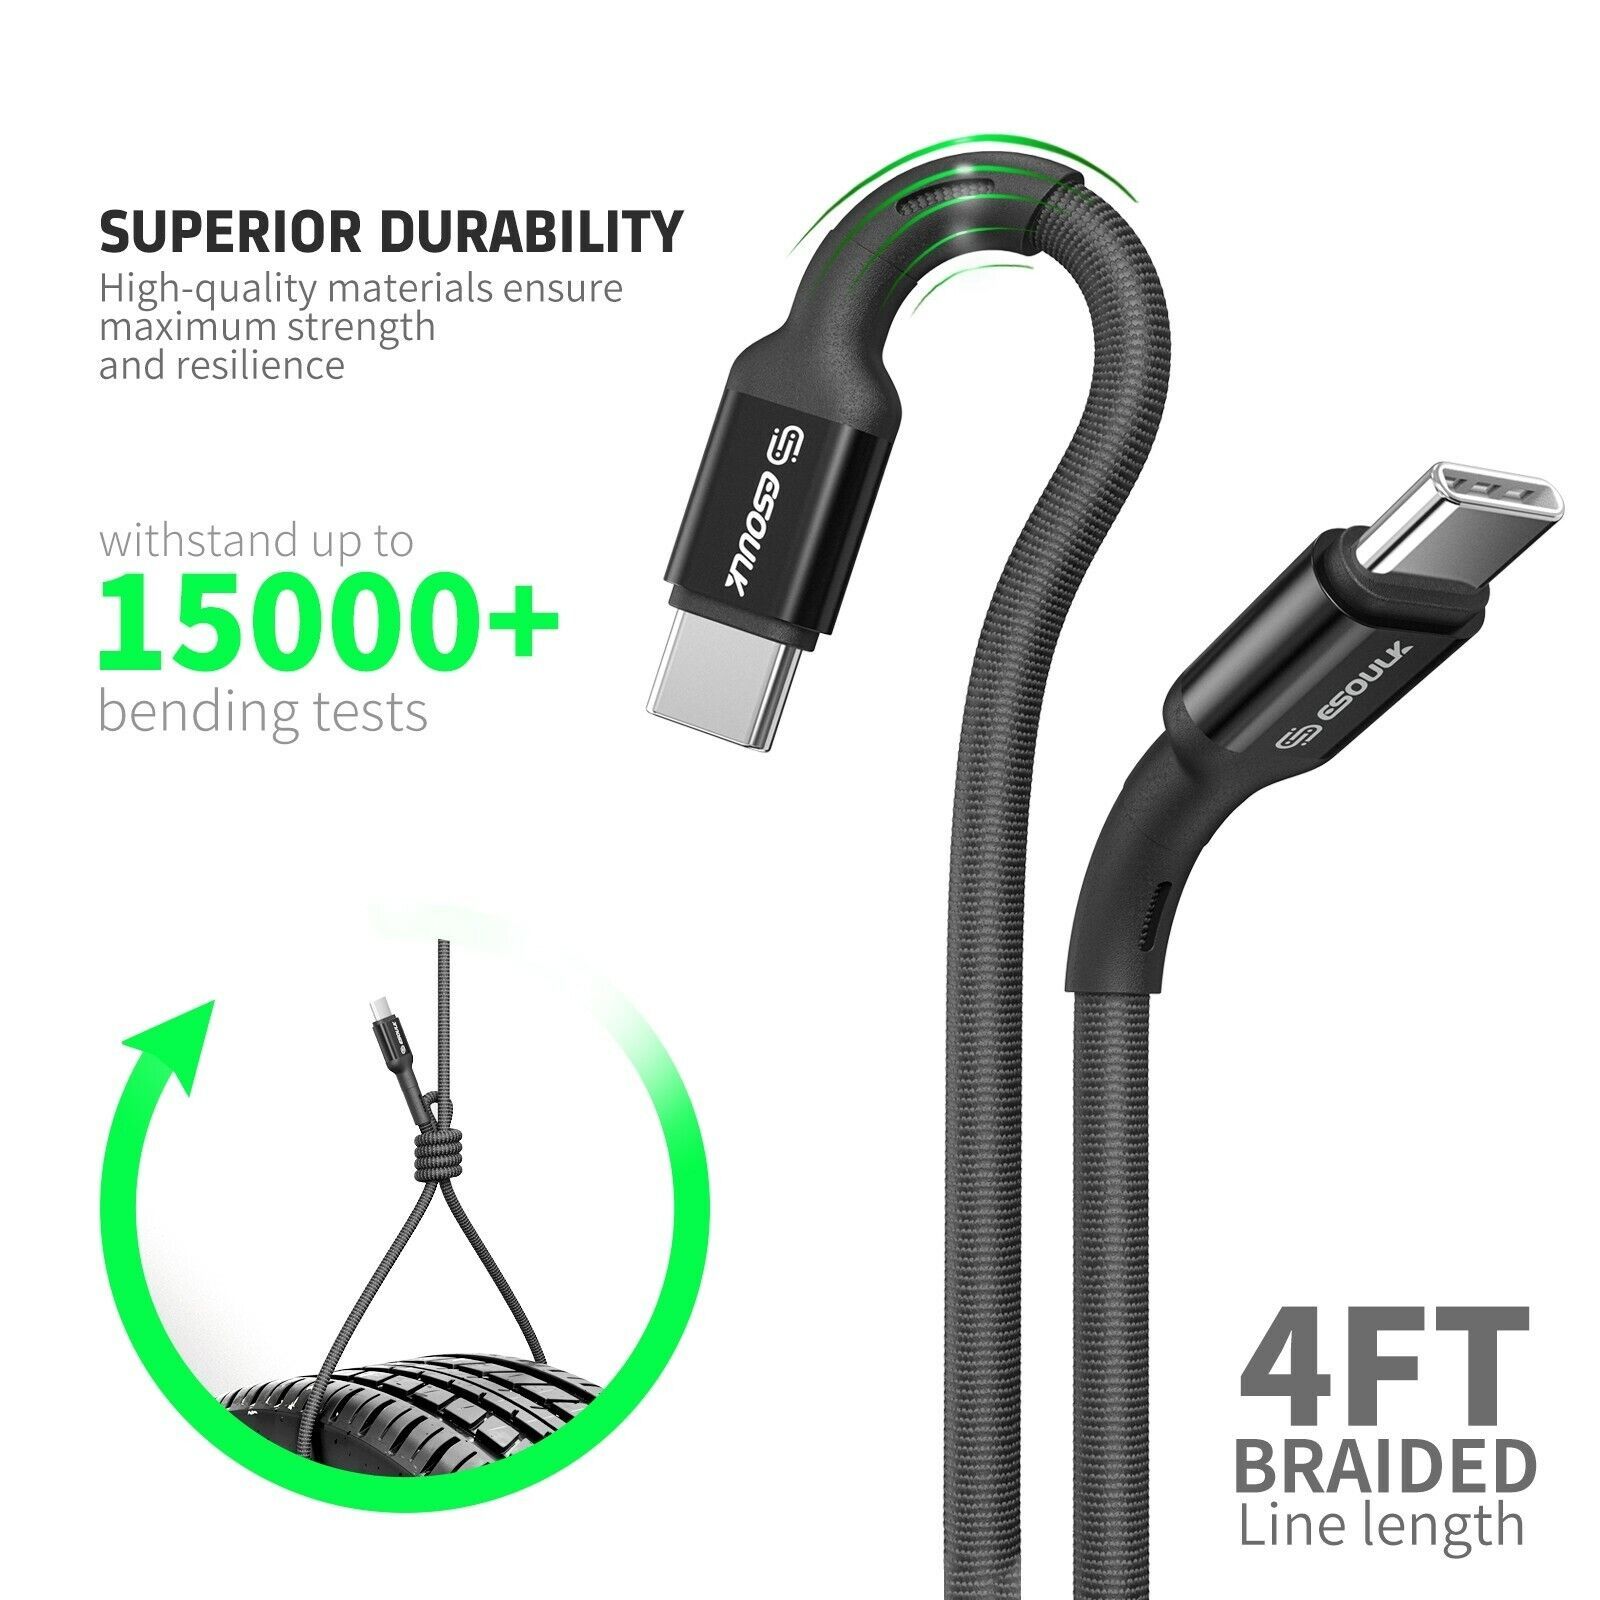 4FT Type C to C Fast Charge Cable For Verizon TCL Flip Pro 4056S - $9.85